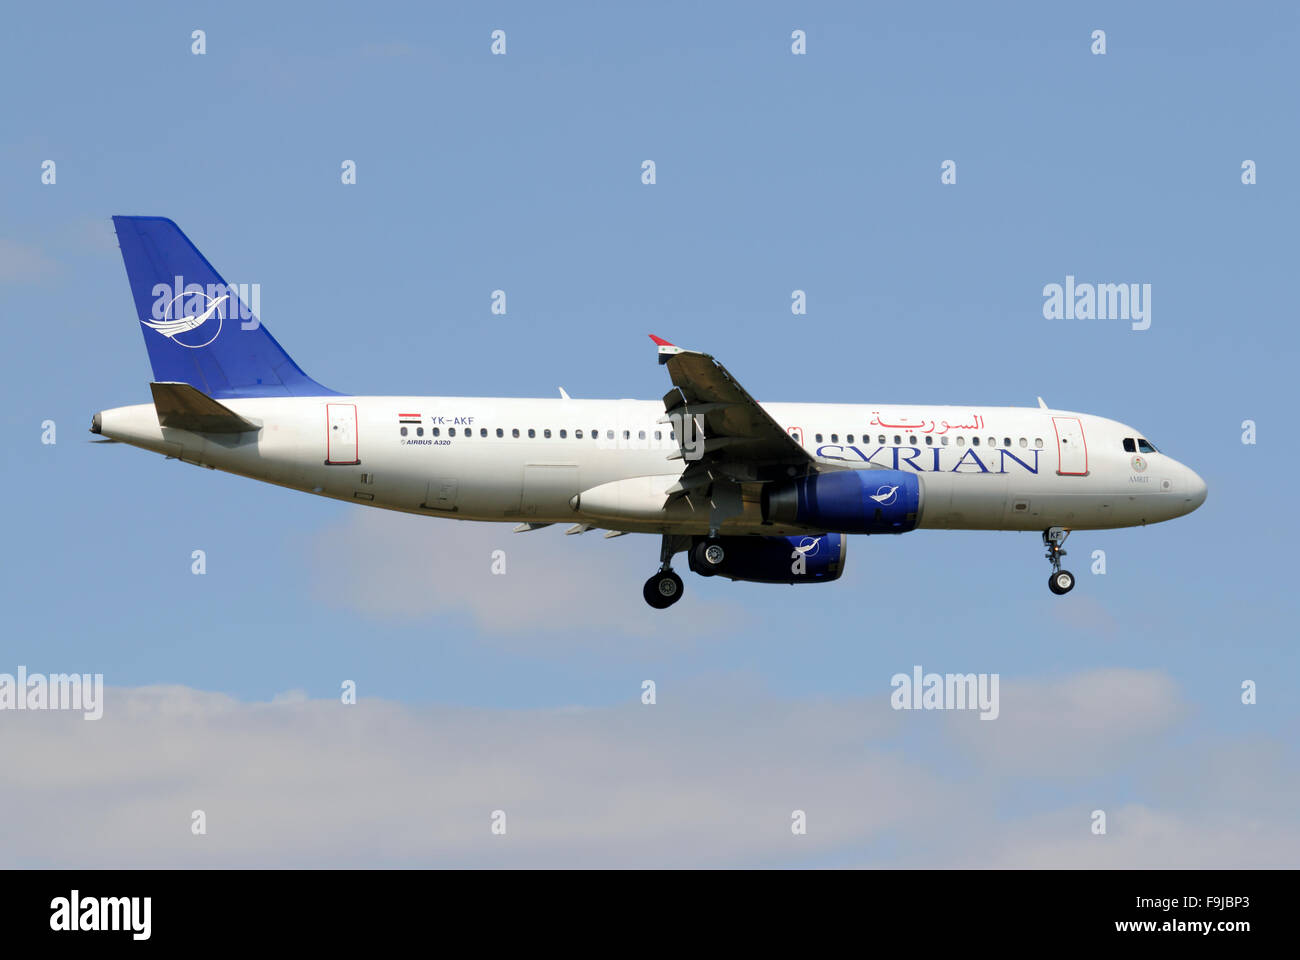 Syrian Air Airbus A320 during Final Approach Stock Photo